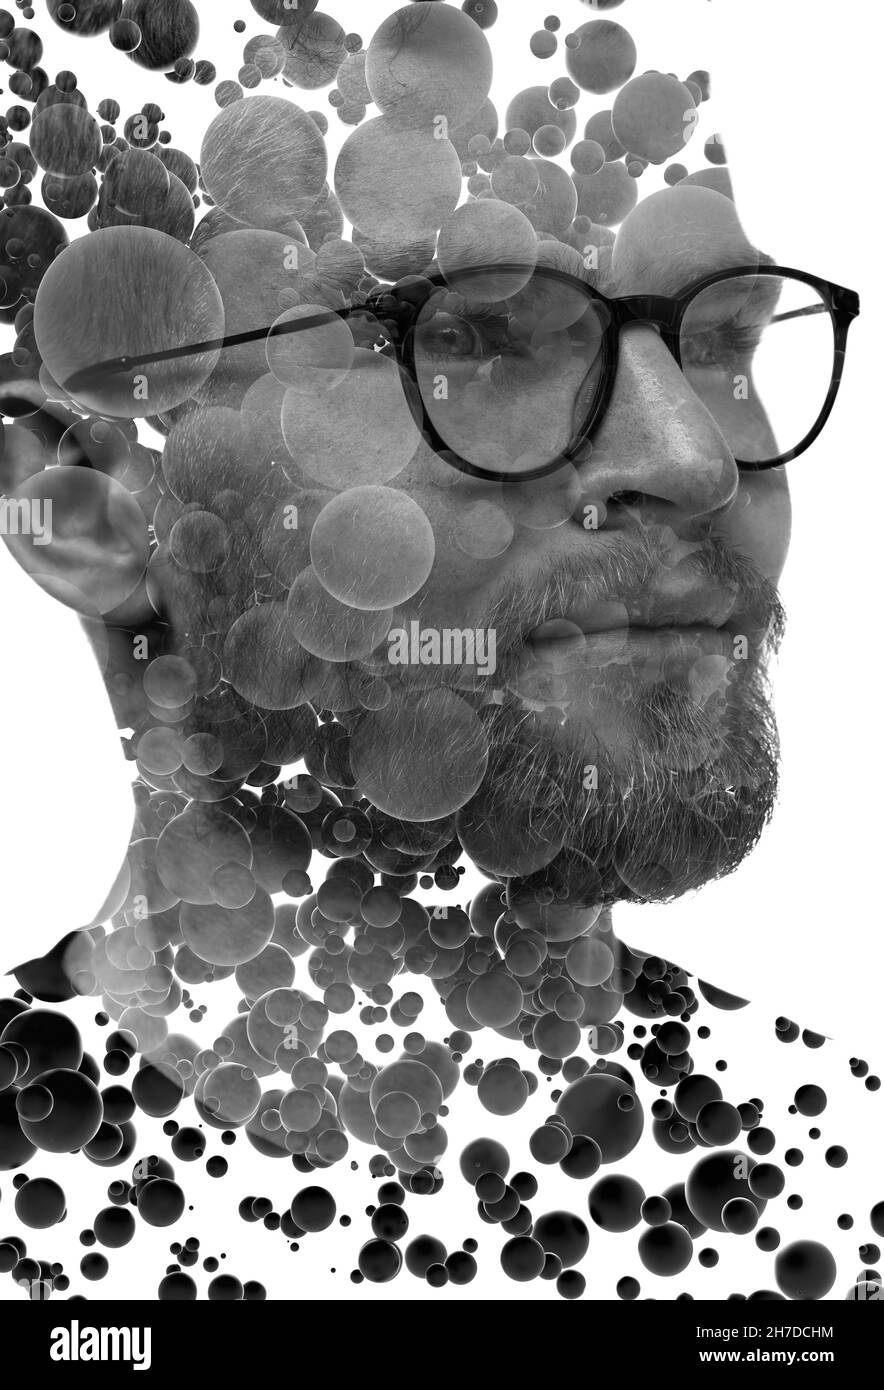 A portrait of a man combined with 3D spheres in a double exposure technique. Stock Photo